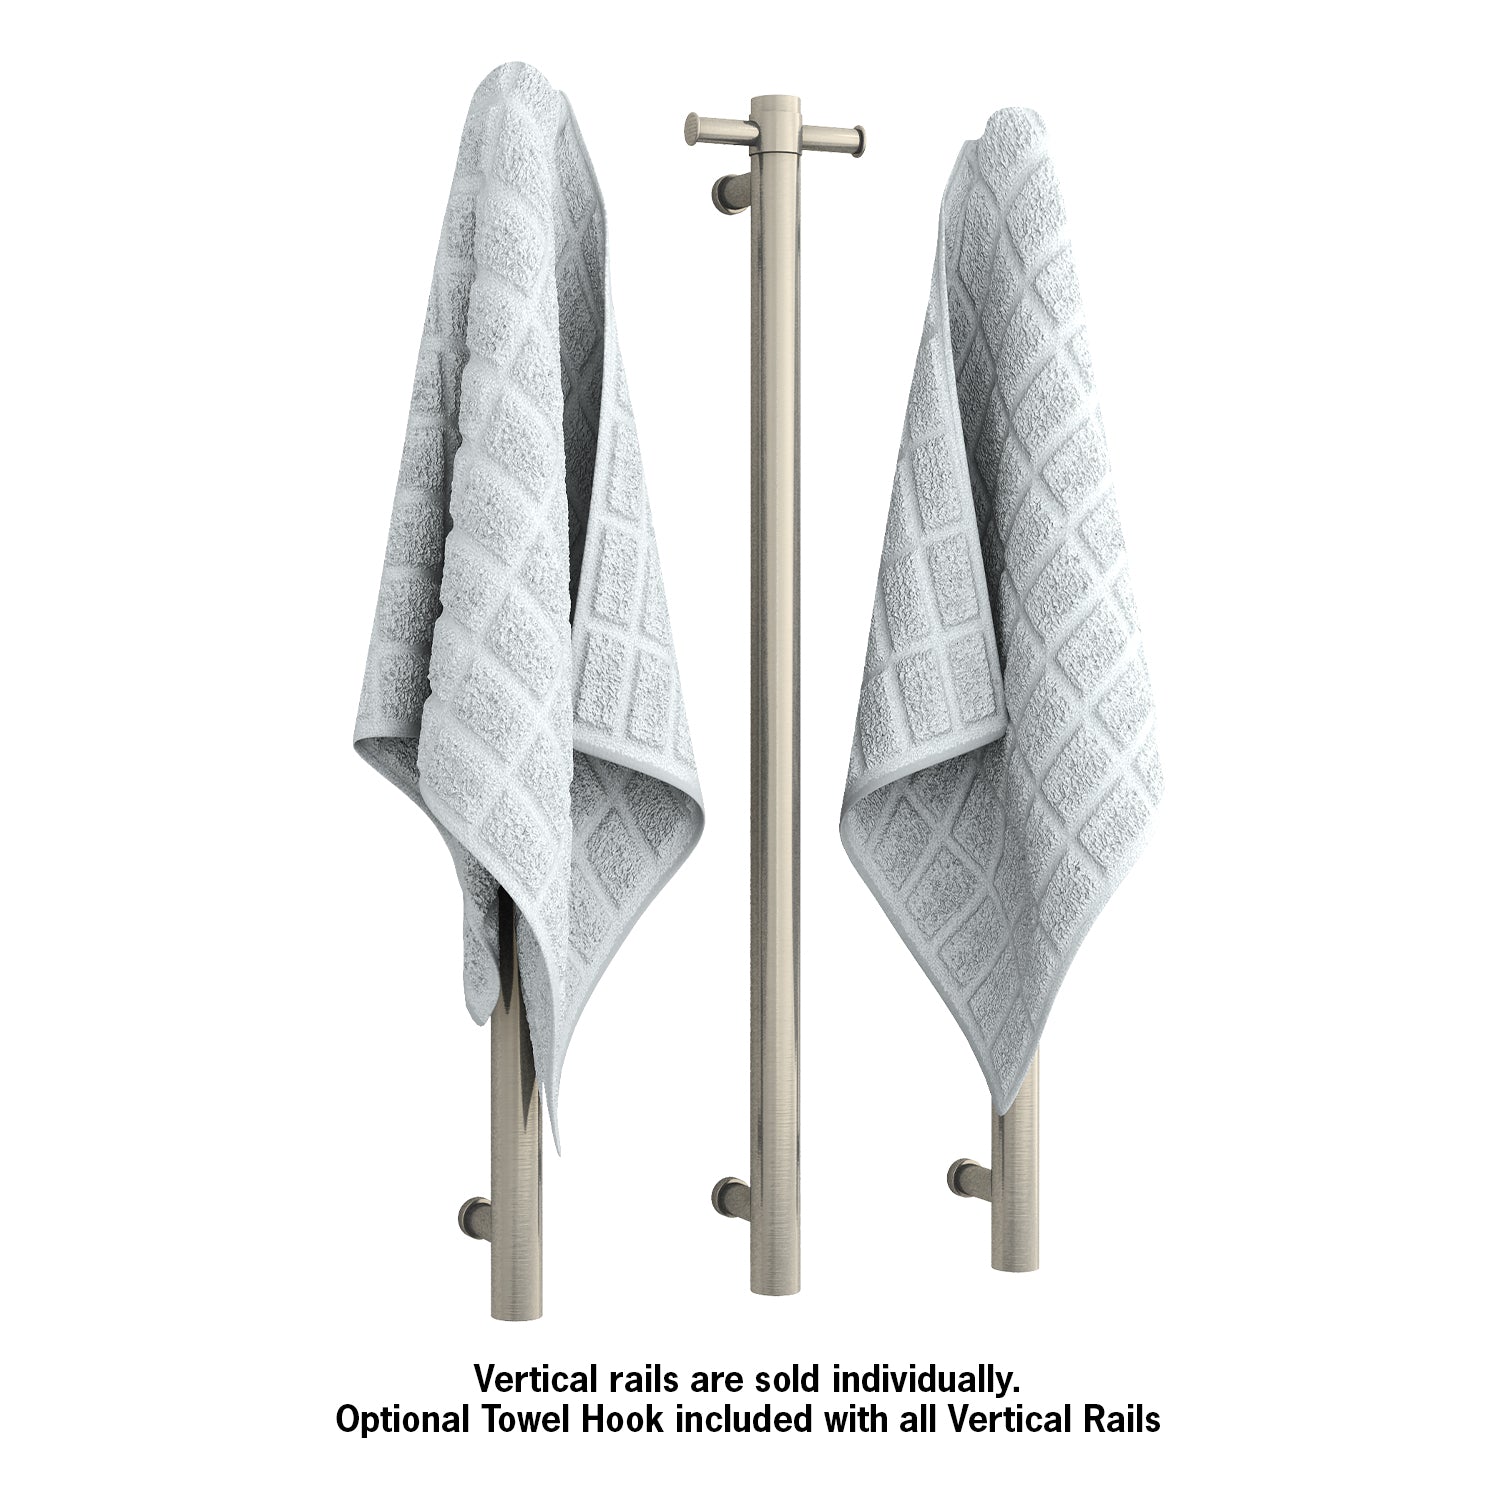 Thermogroup Round Vertical Single Heated Towel Rail Brushed Nickel VS900HBN